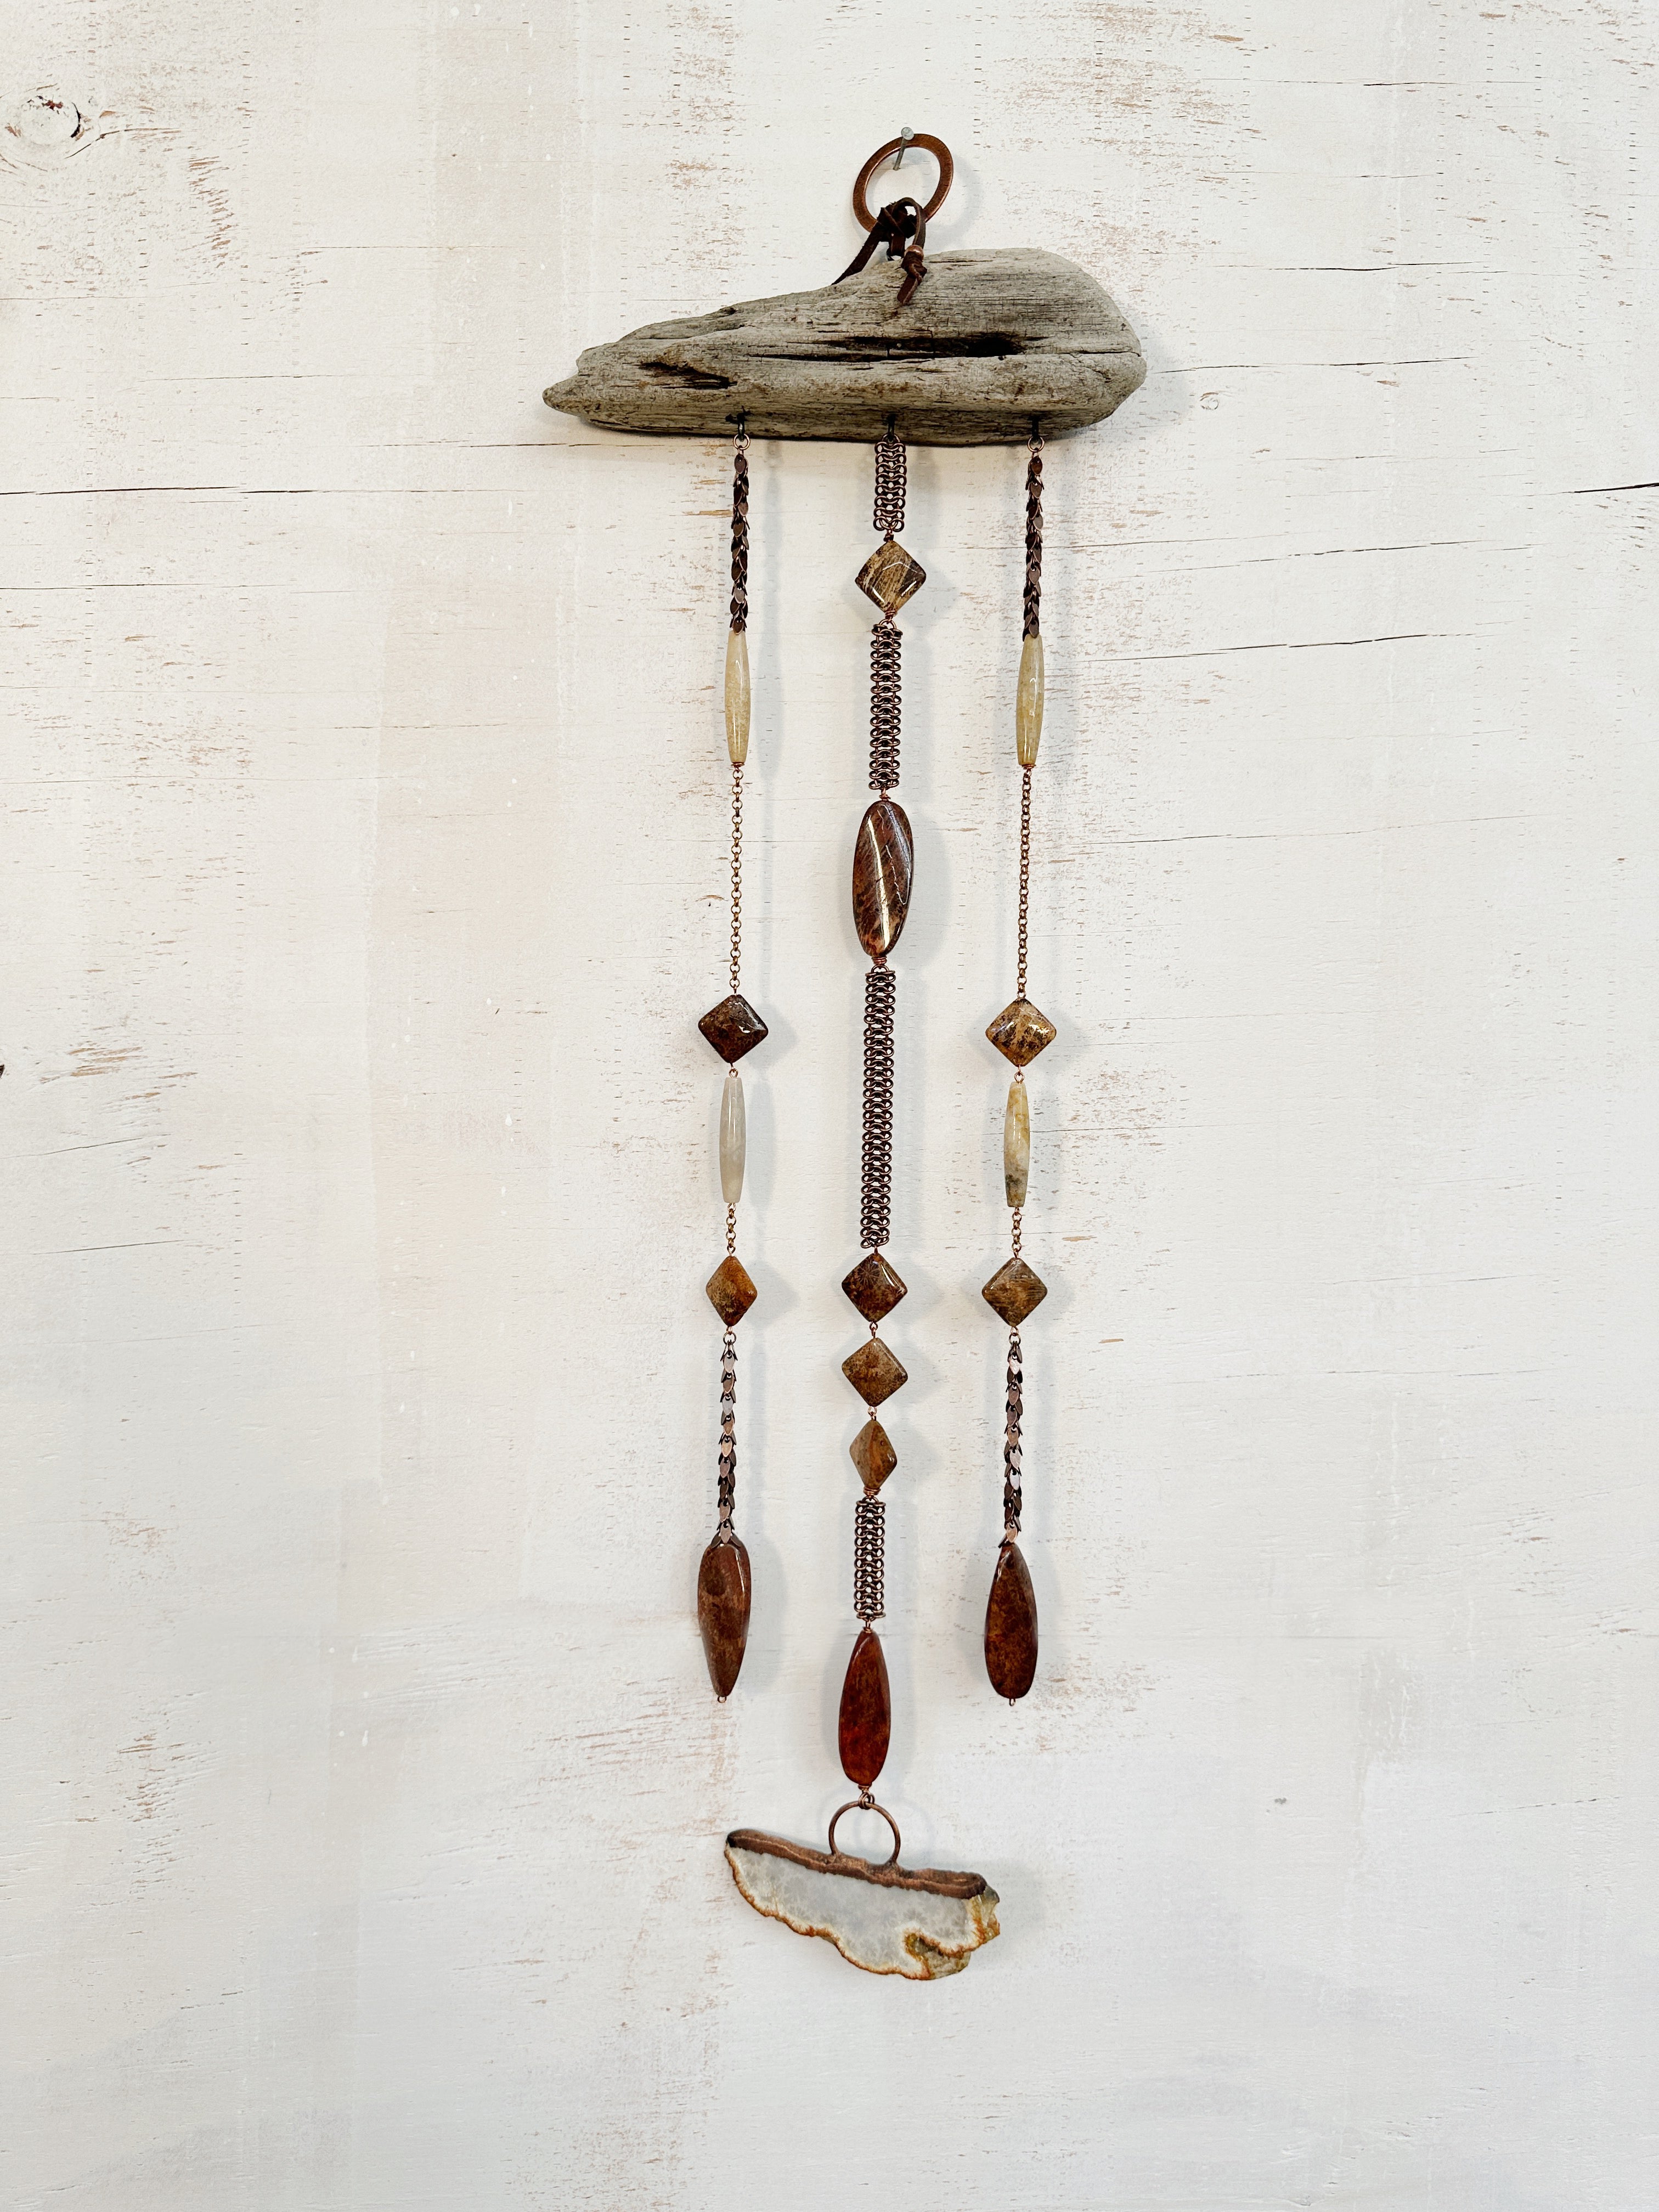 The Protector, Natural Wall Hanging with Driftwood, Fossilized Coral and Copper - Jester Swink